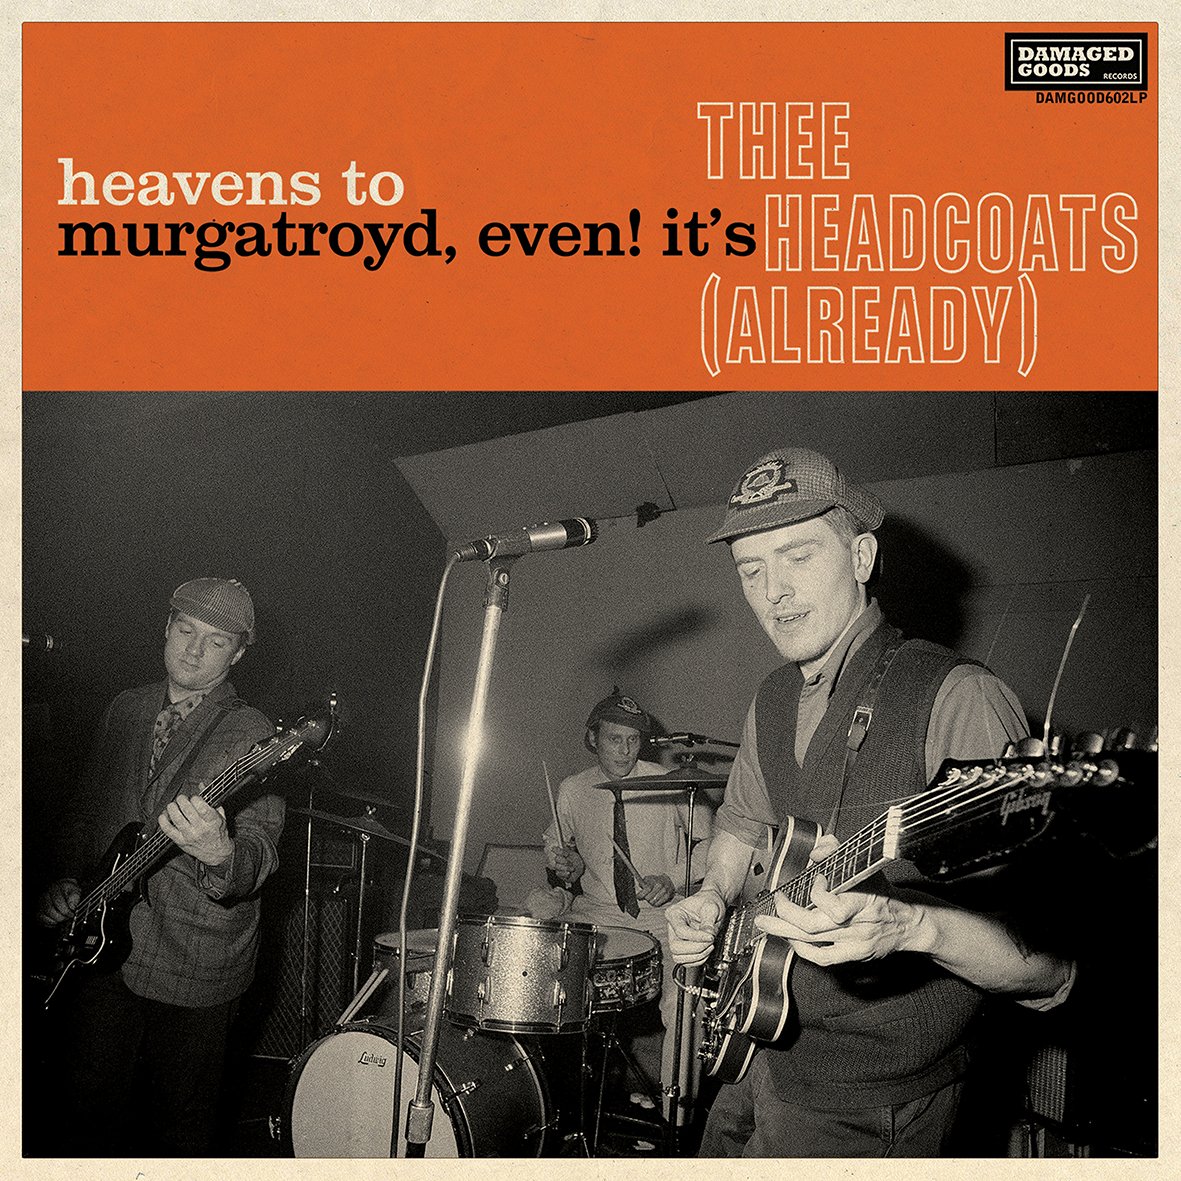 OUT TODAY! Thee Headcoats - Heavens To Murgatroyd, Even! It's Thee Headcoats (Already) CD/LP BUY HERE - damagedgoods.greedbag.com/buy/heavens-to… REISSUE OF CLASSIC ALBUM ORIGINALLY RELEASED BY SUB POP RECORDS IN 1990!